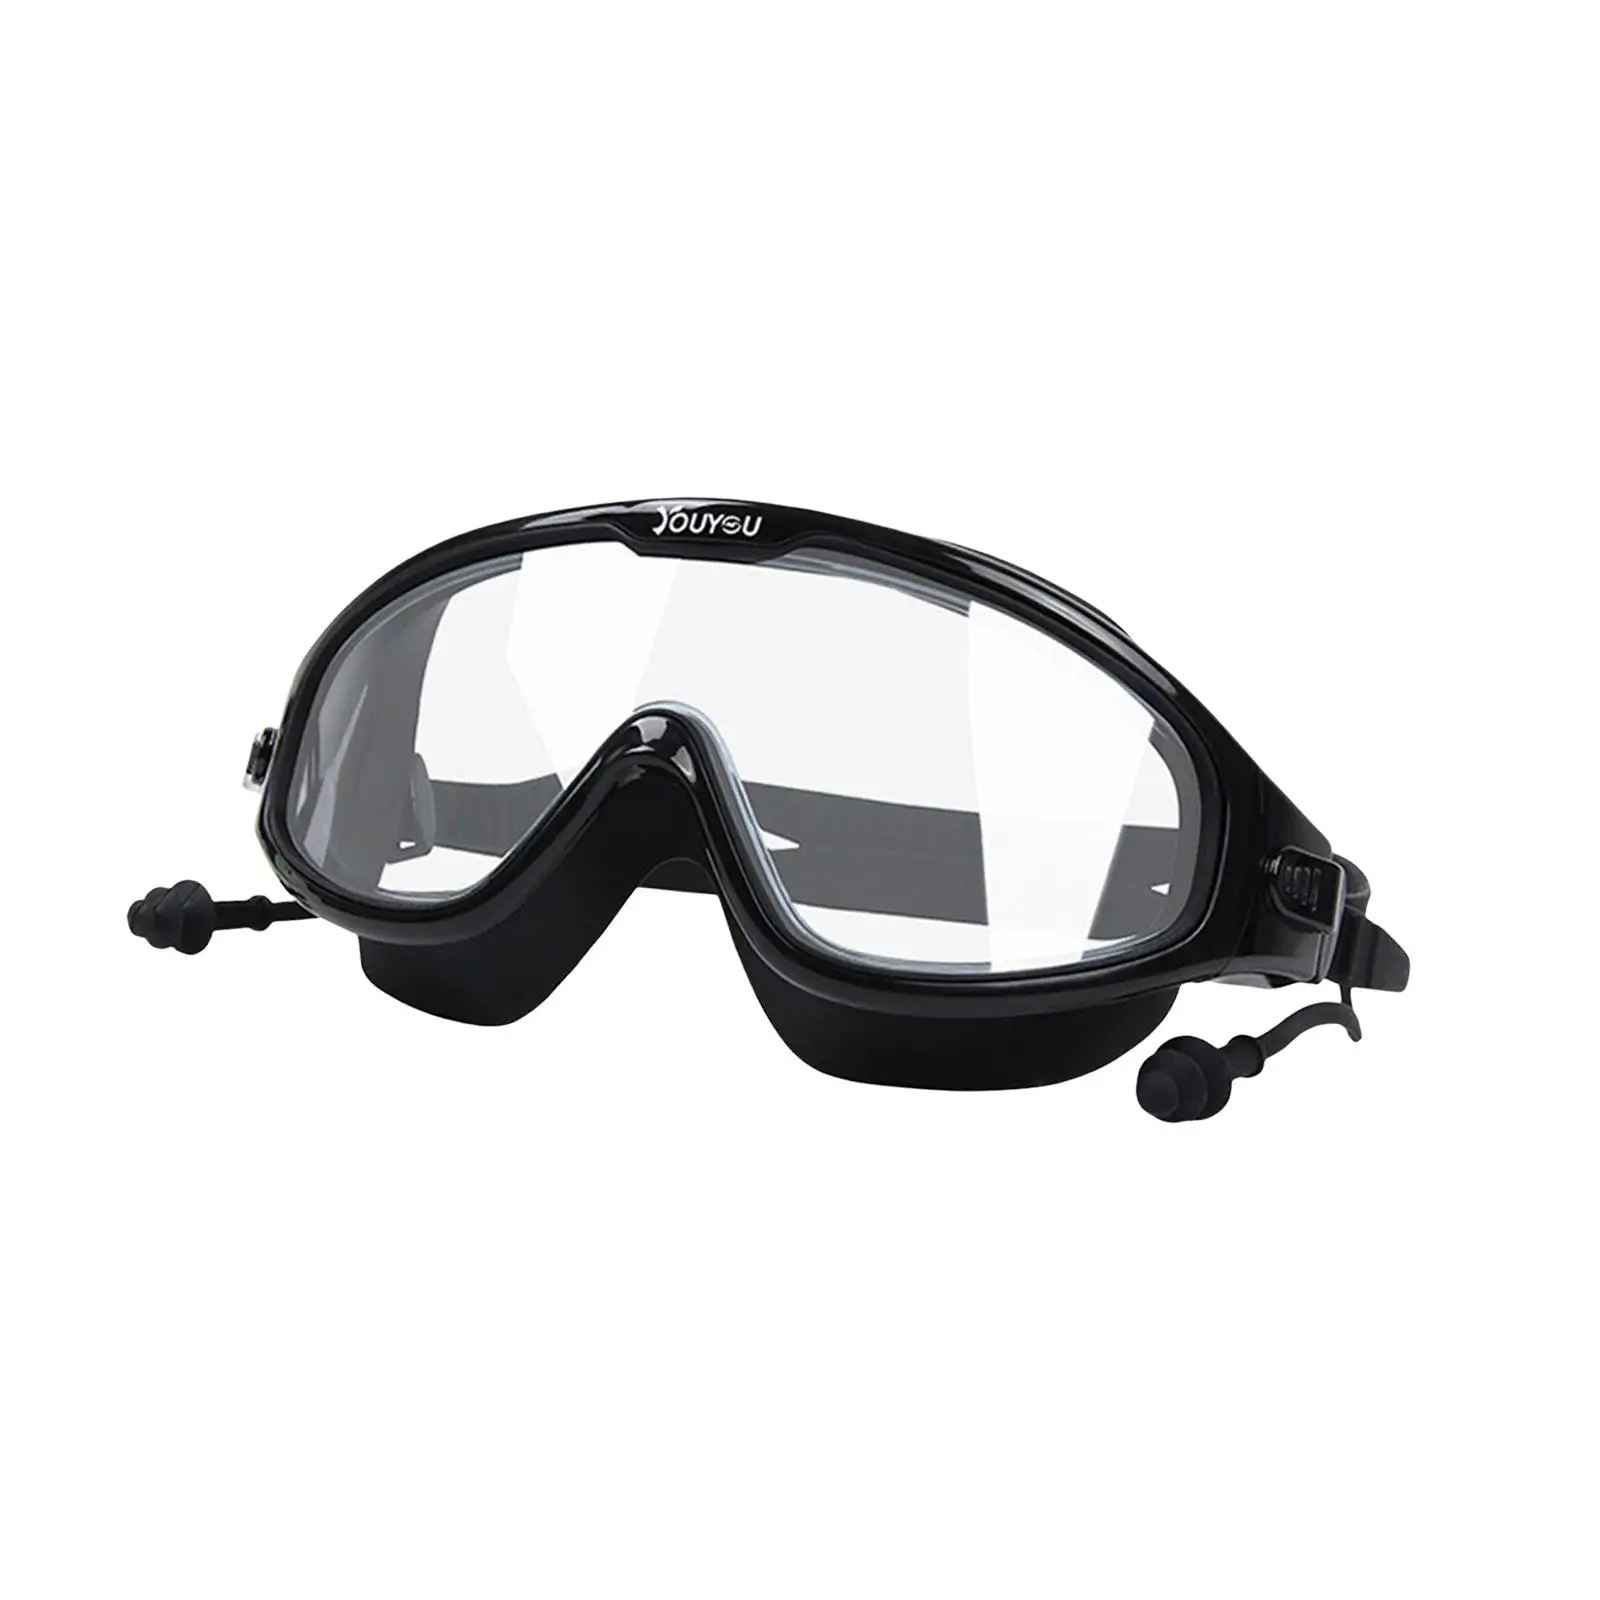 Swimming Goggles, Wide View No Leaking Swim Glasses with Nose Clips + Earplugs, Adjustable Large Frame Swim Goggles Waterproof